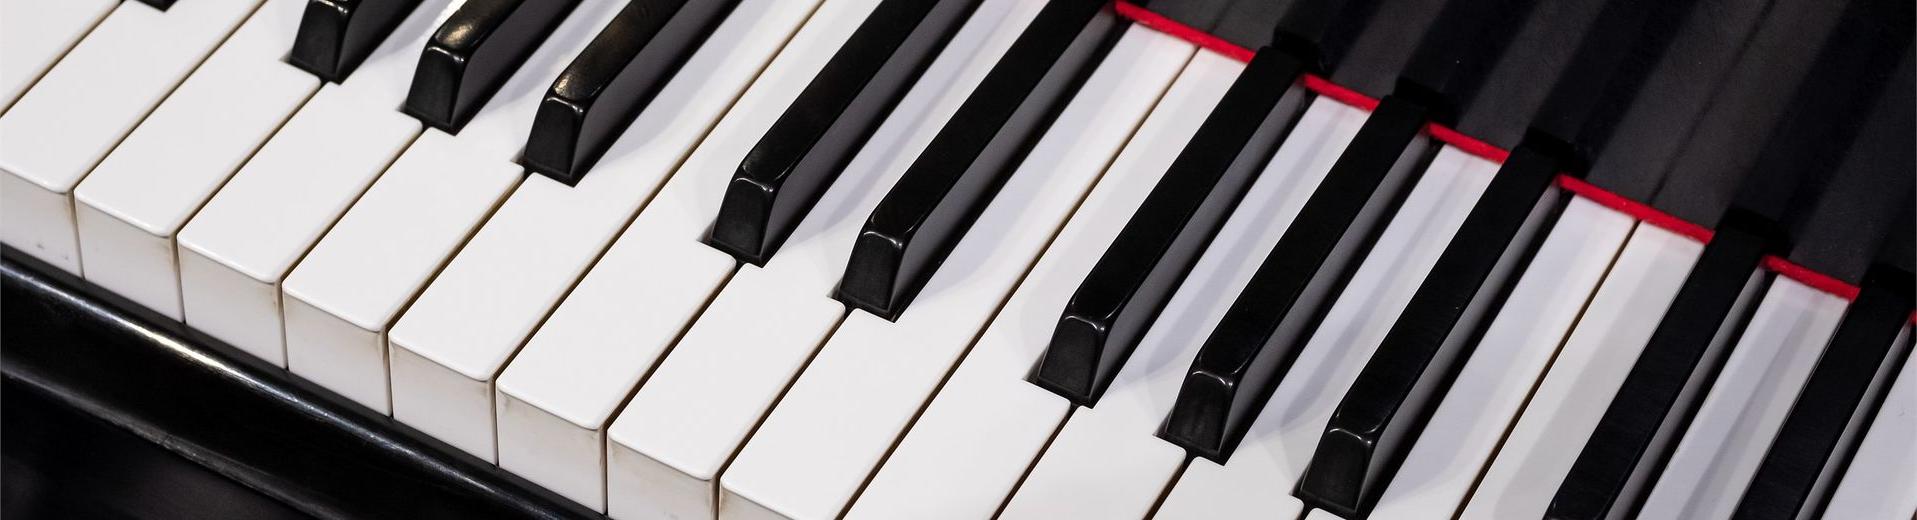 The black-and-white keys of a Steinway piano.